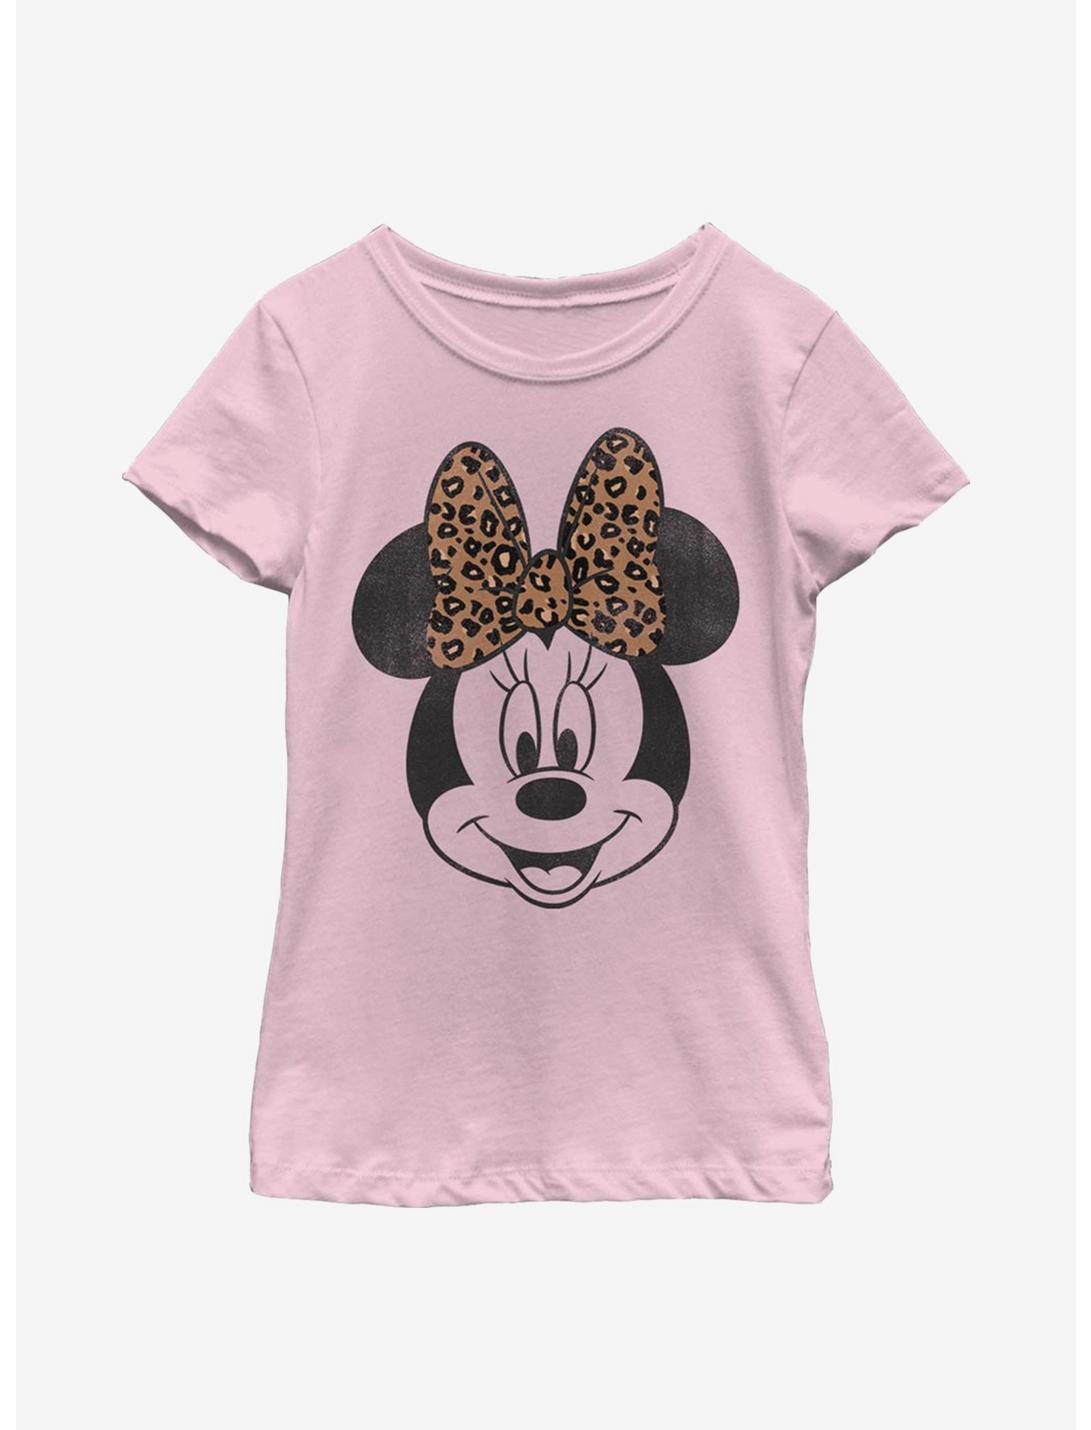 Disney Mickey Mouse Modern Minnie Face Leopard Youth Girls T-Shirt, PINK, hi-res